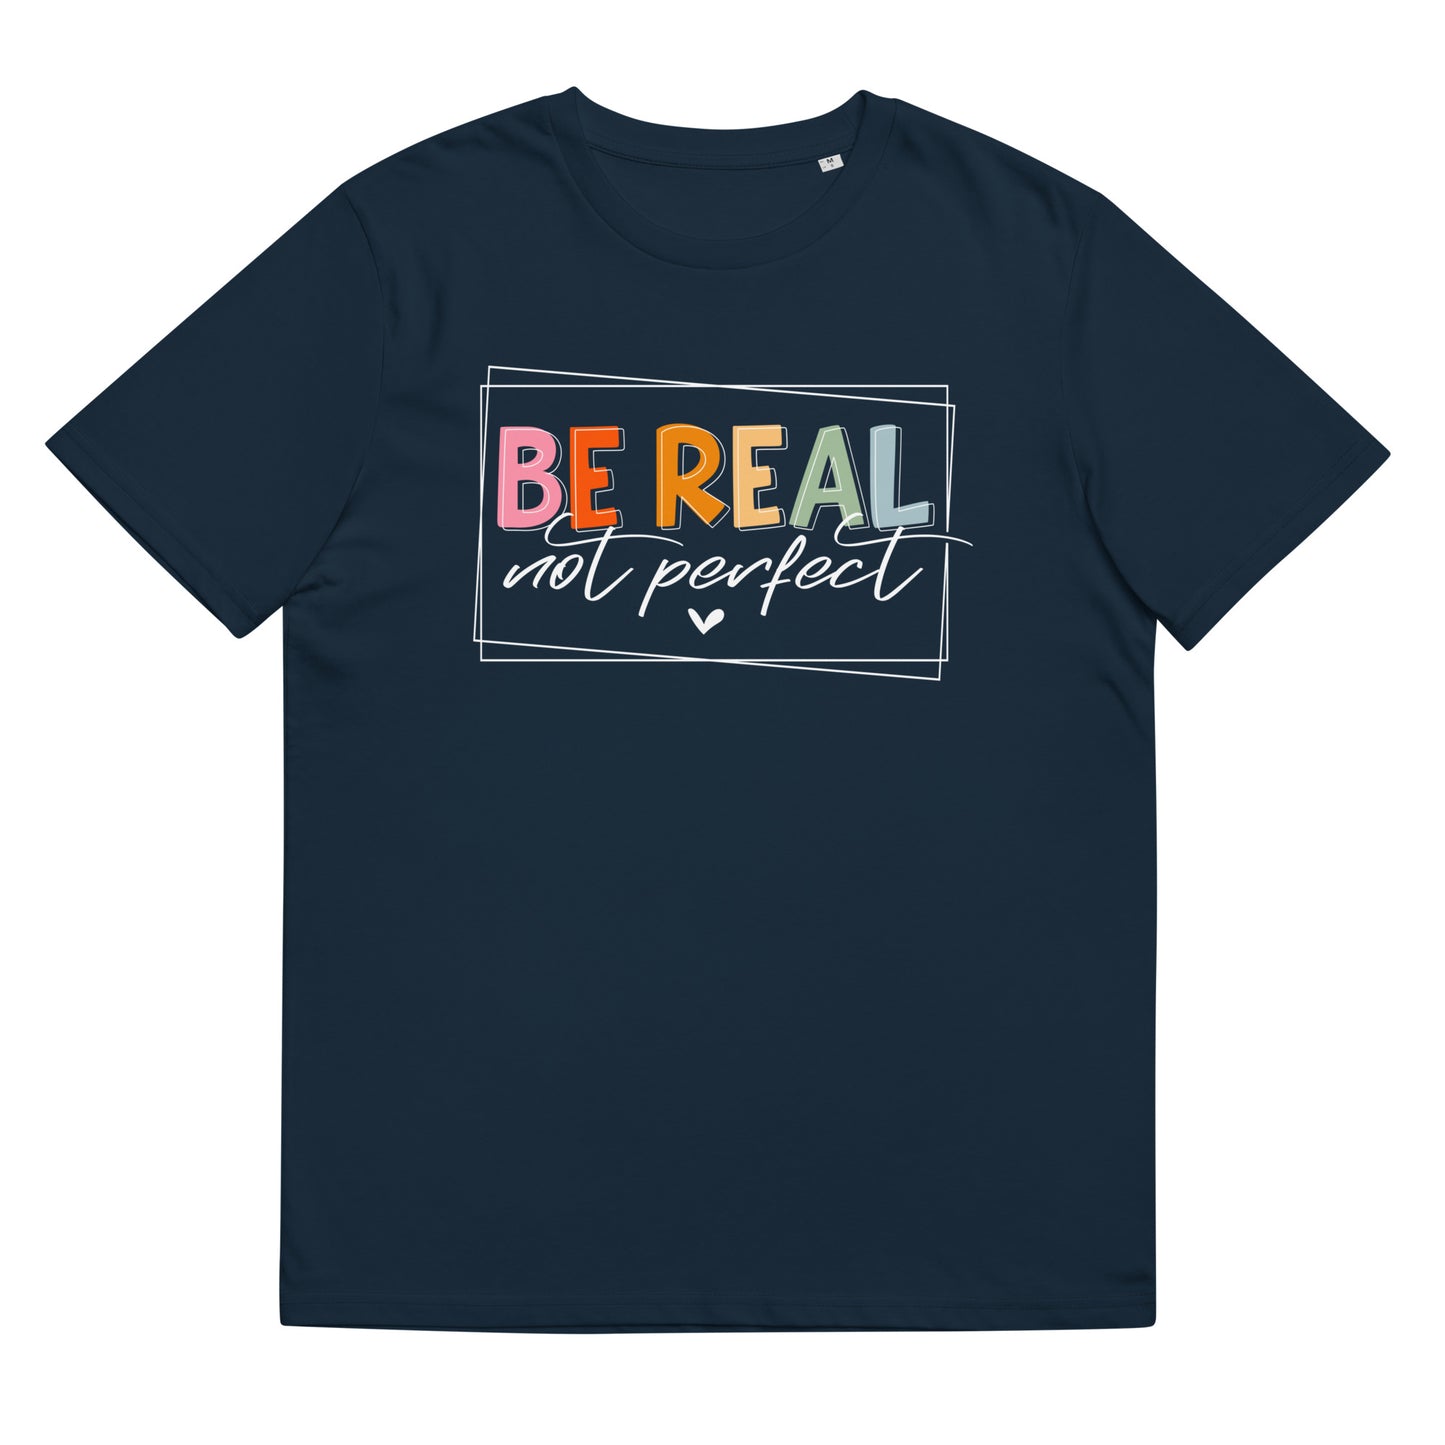 Organic cotton unisex t-shirt: "Be real, not perfect", dark color